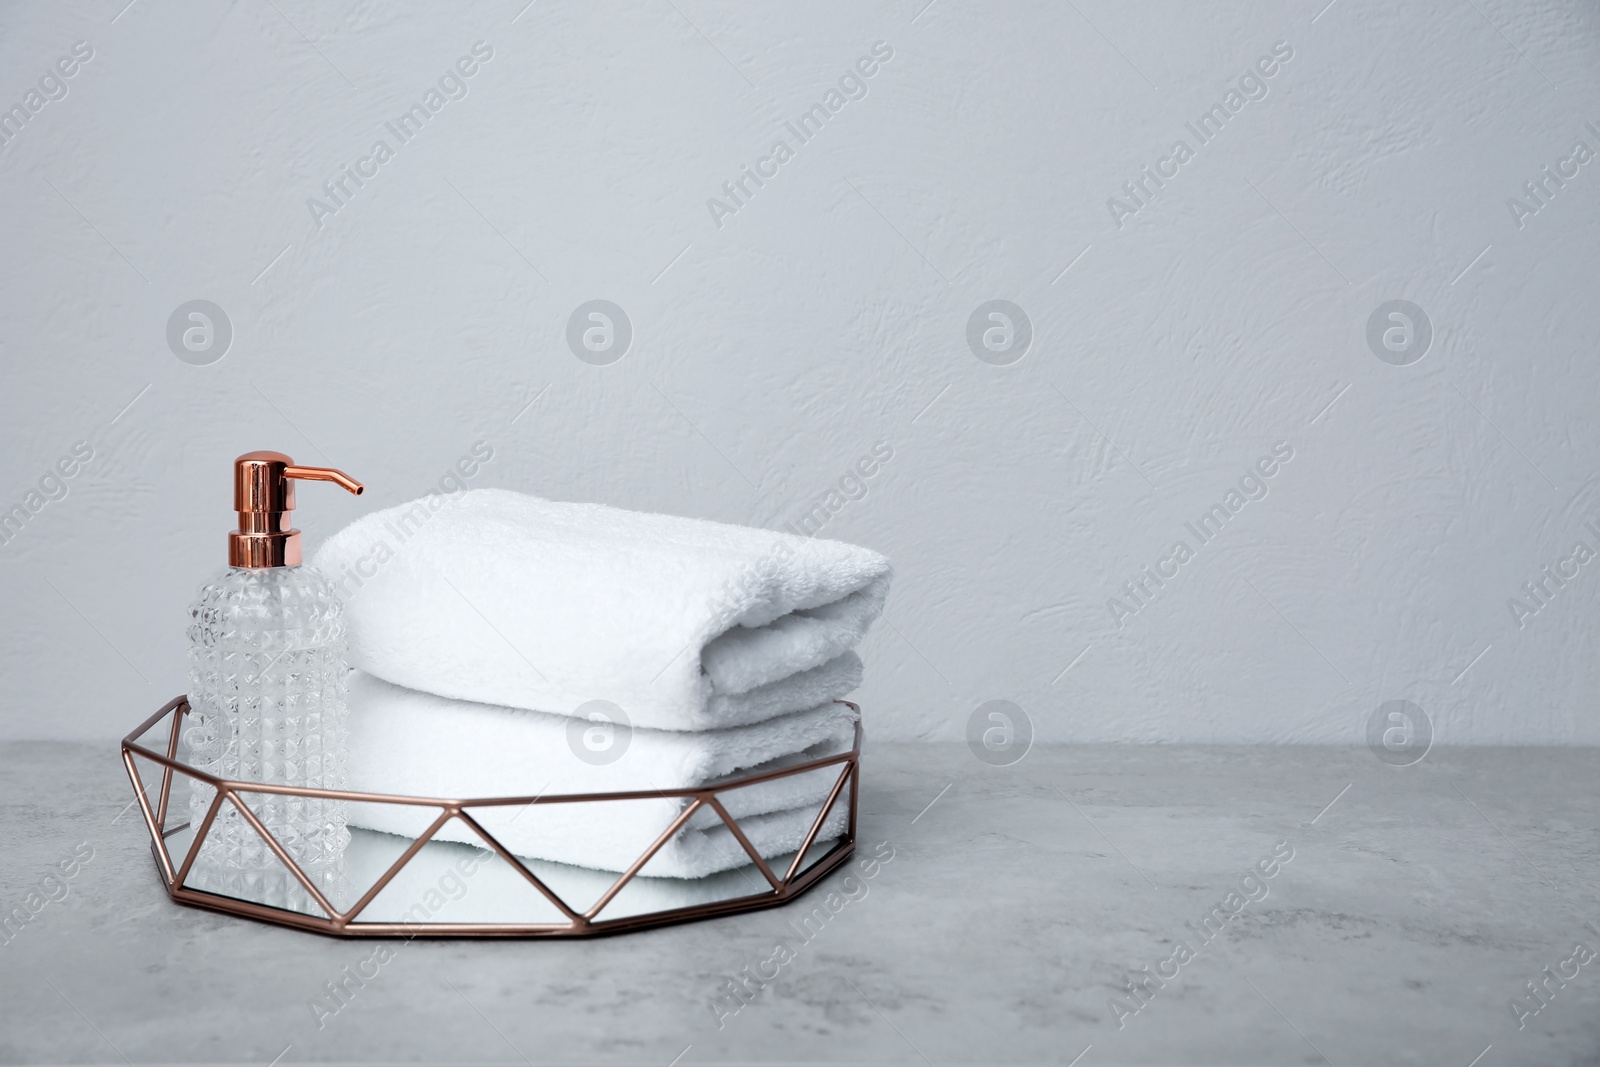 Photo of Tray with towels and soap dispenser on table against grey background